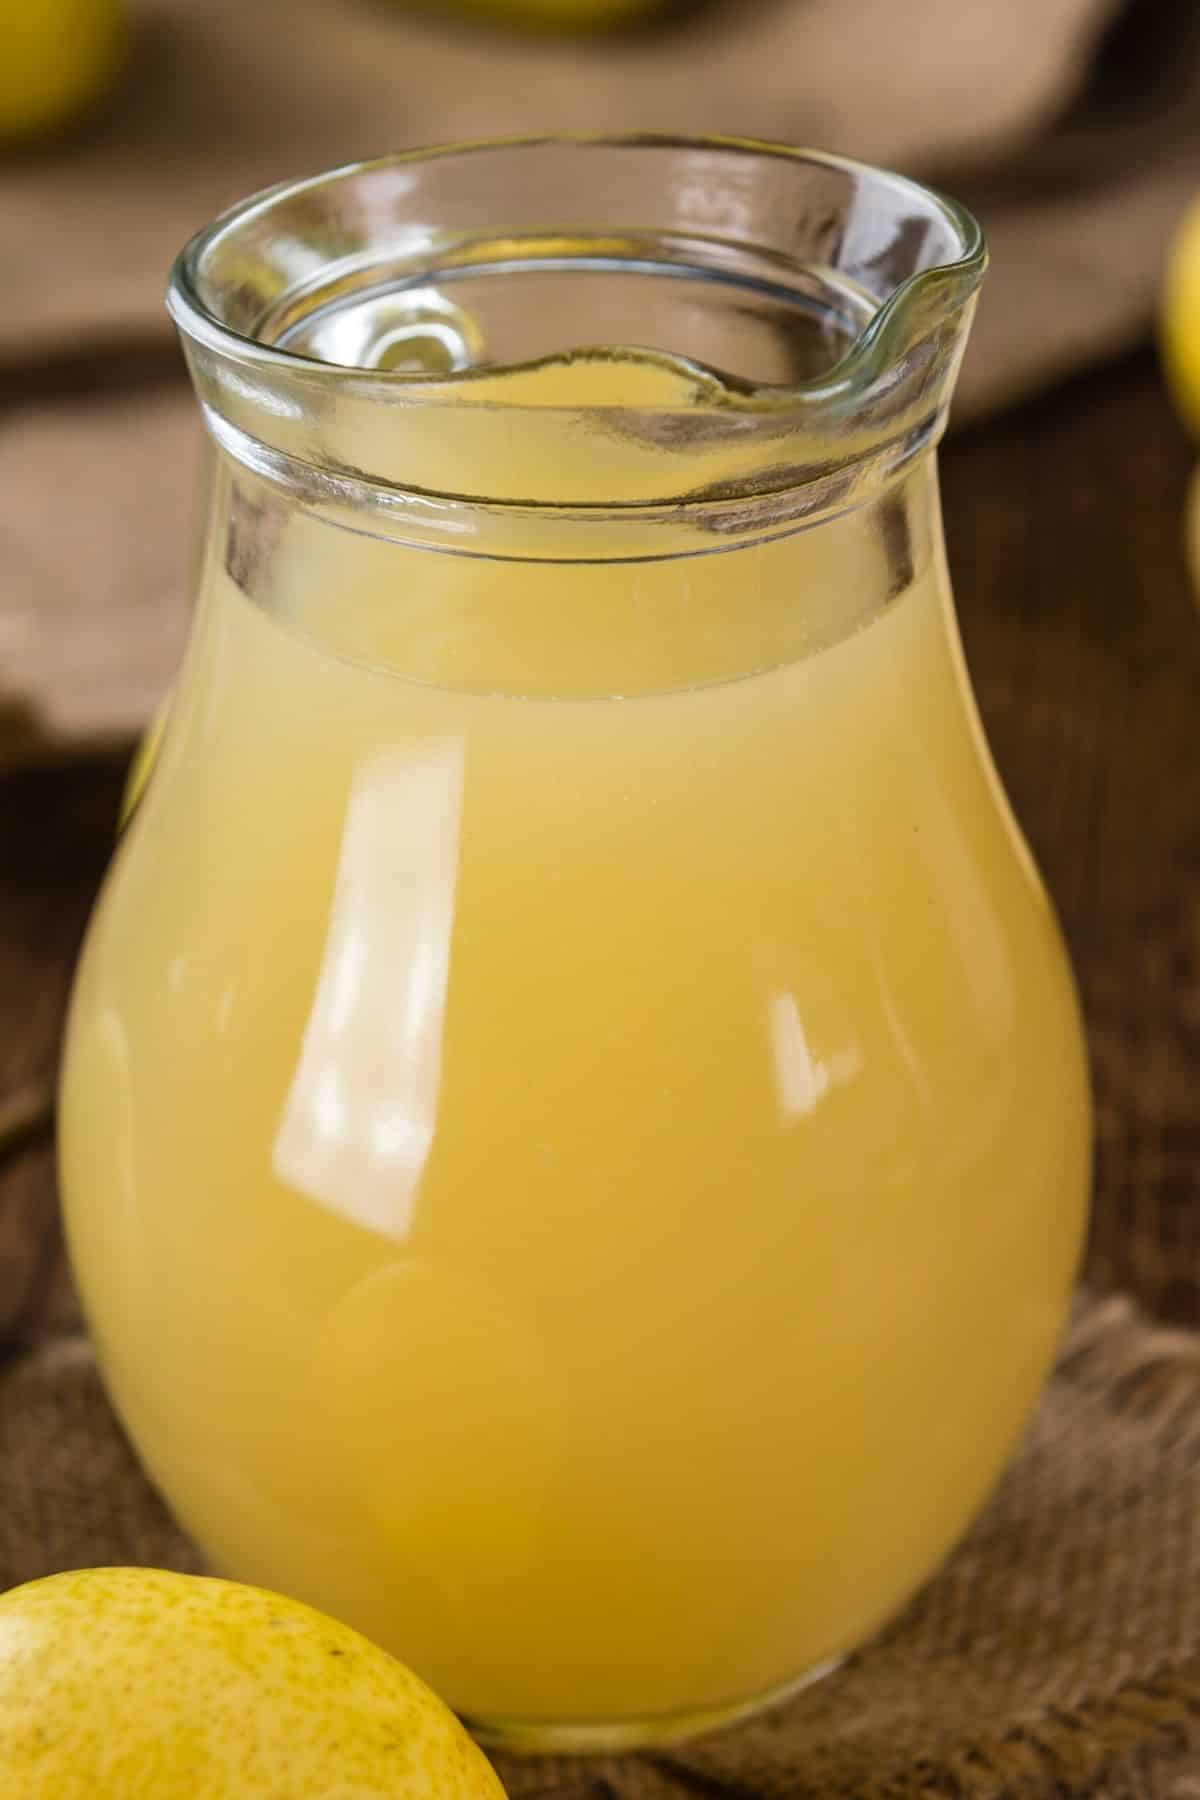 A small pitcher of yellow pear juice.